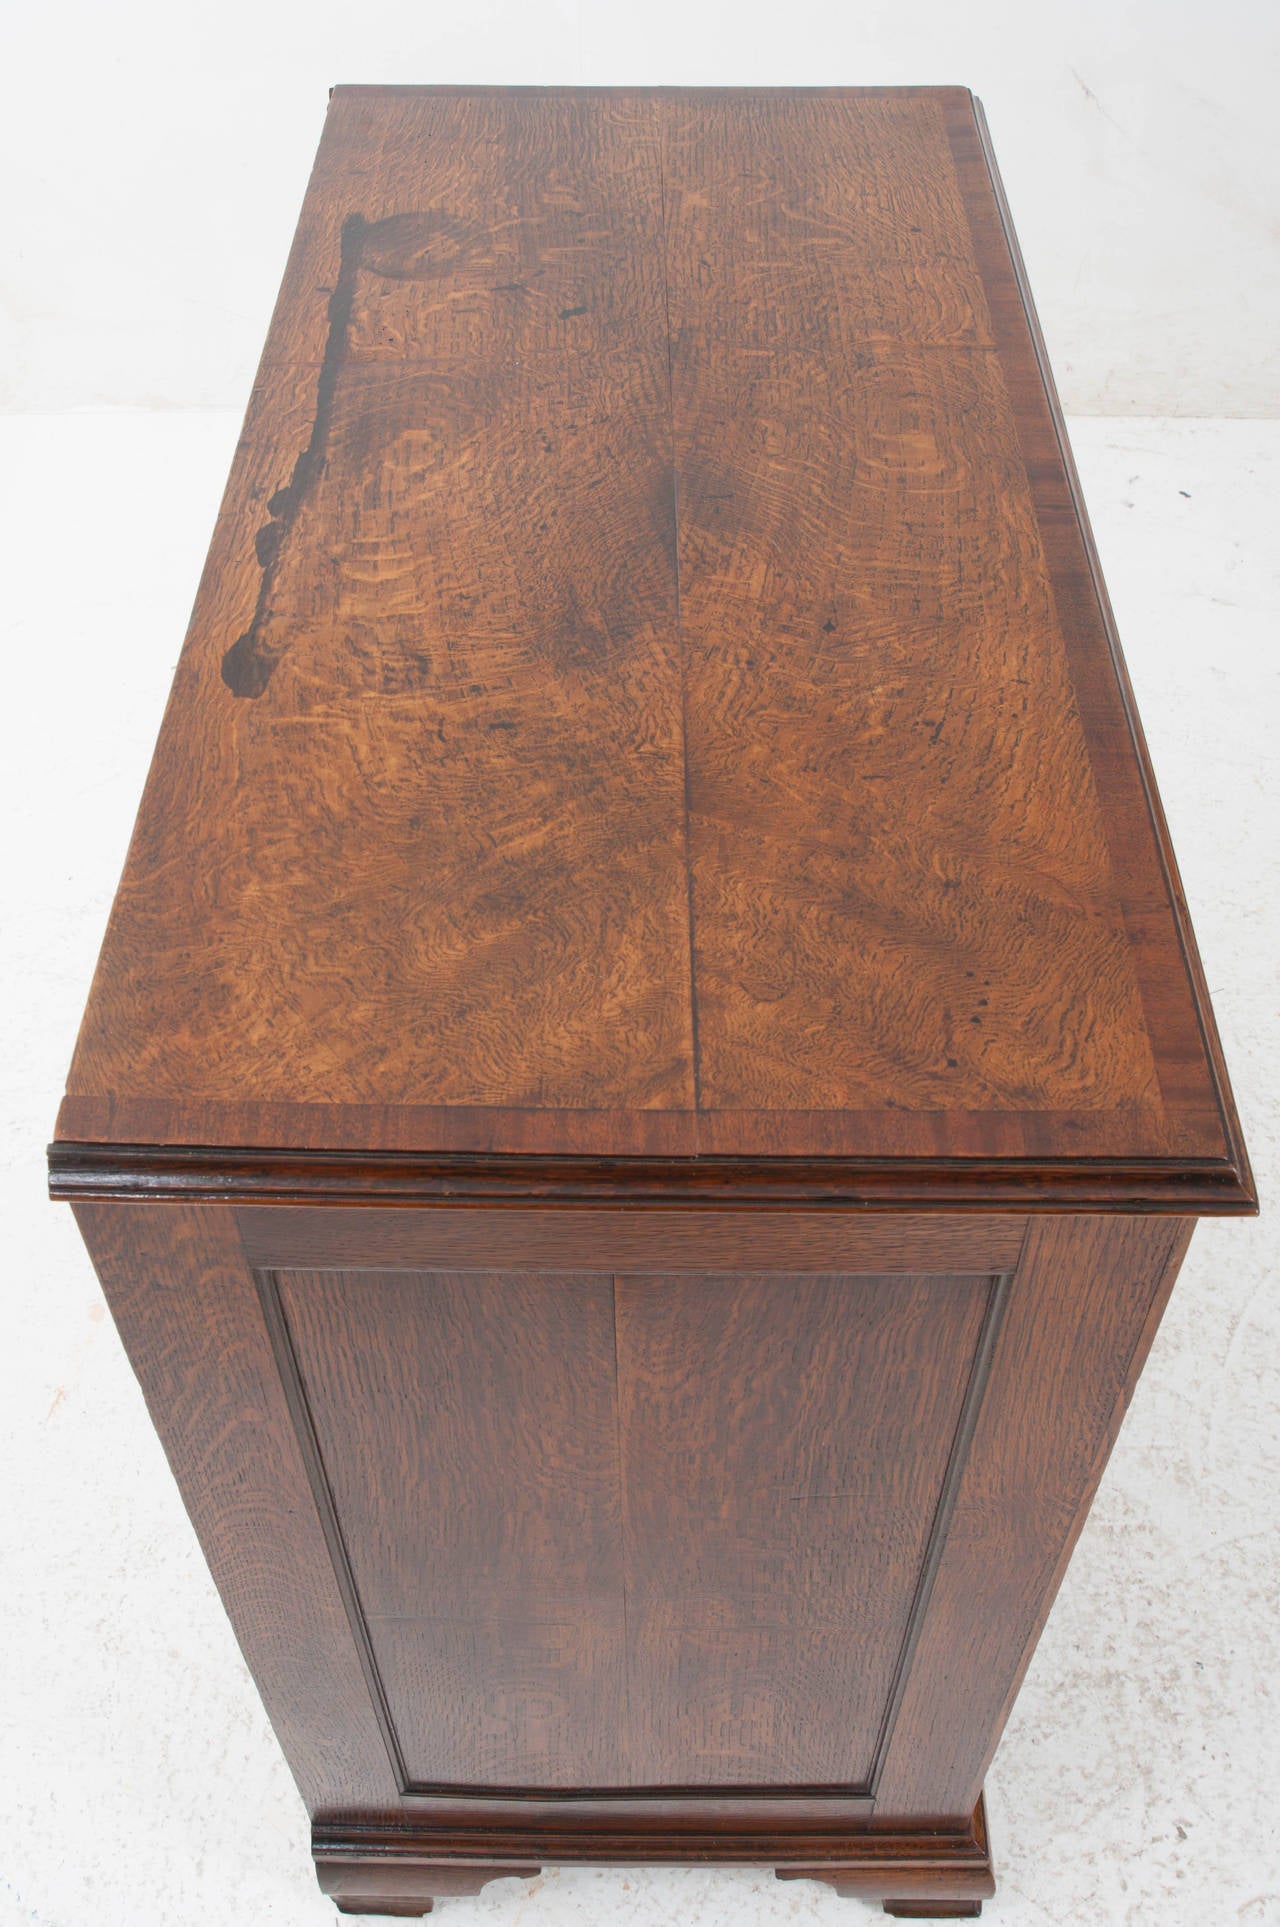 A stunning English Lancashire oak chest of drawers made with the finest oak. The drawers are thoughtfully banded and pronounced using inlay oak of a darker stain. The hardware is original and appropriate for this fine antique. This chest retains its